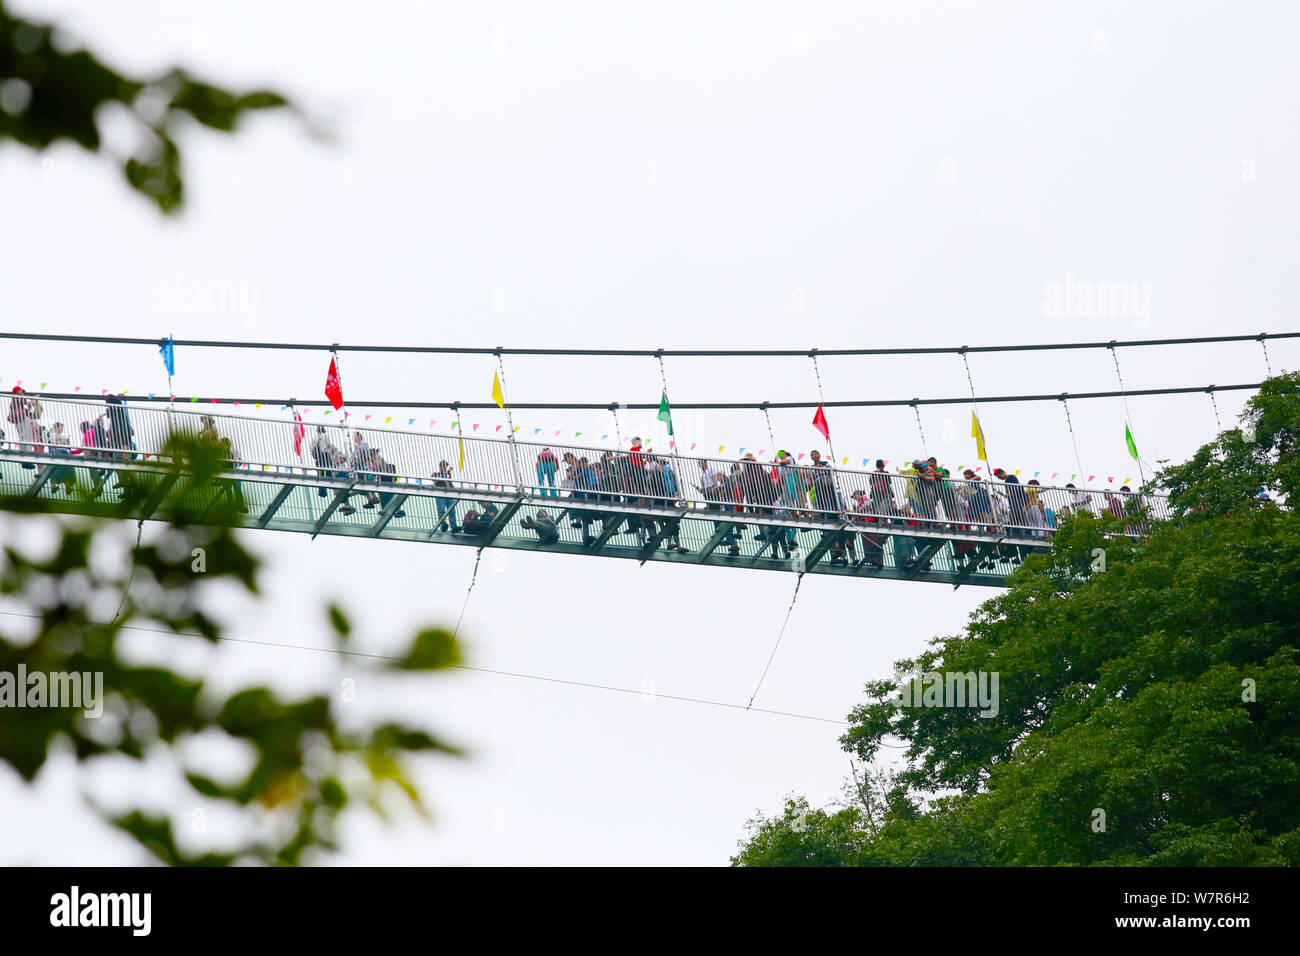 An worm's eye view of the glass bridge crowded with tourists at the Tianlongchi scenic area in Pingdingshan city, central China's Henan province, 11 J Stock Photo